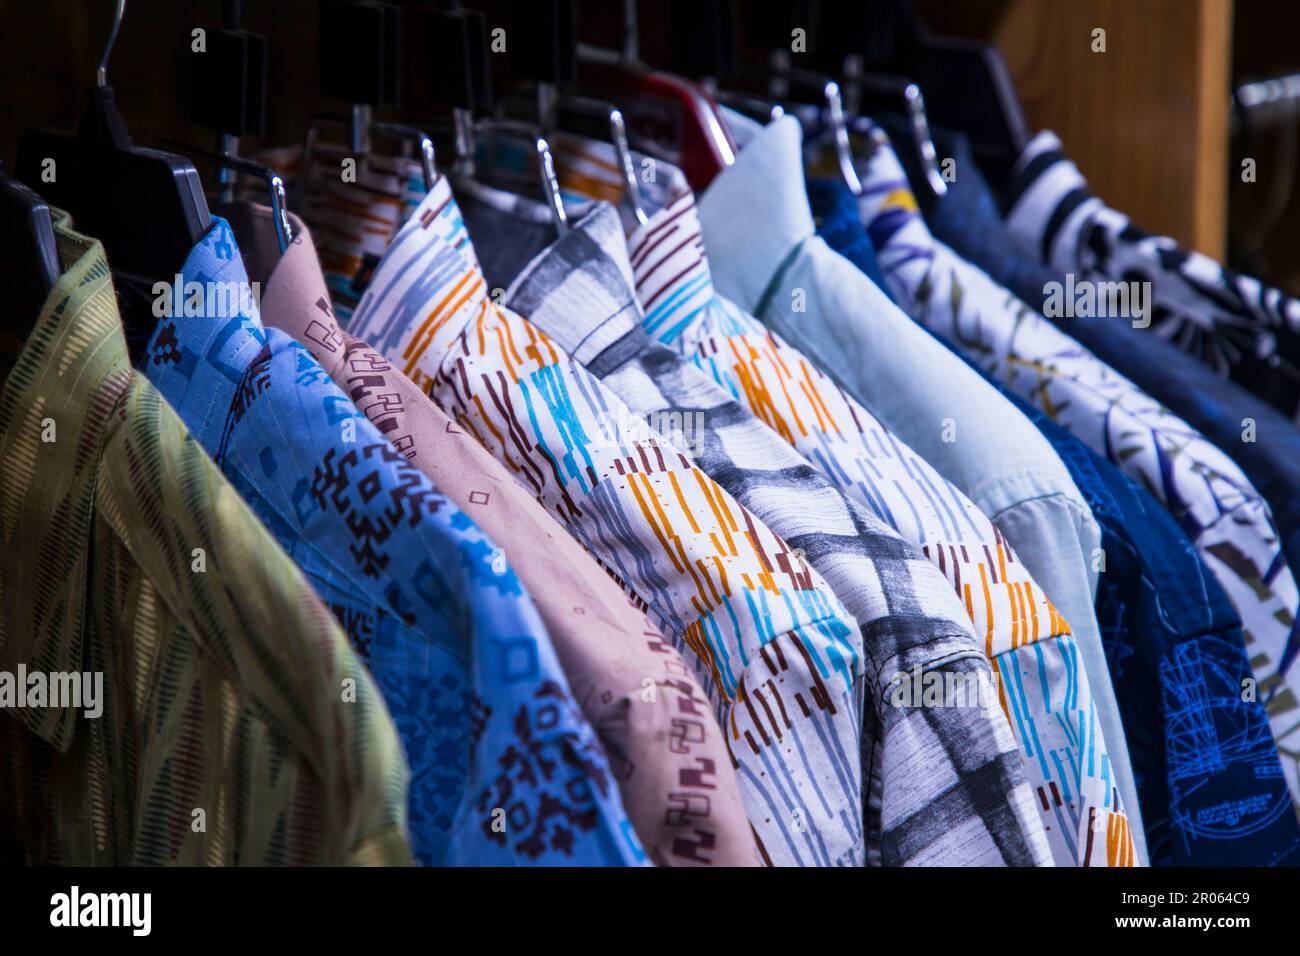 Colorful variety of Shirt  hangings in a clothing Showroom. Close-up Focus Stock Photo